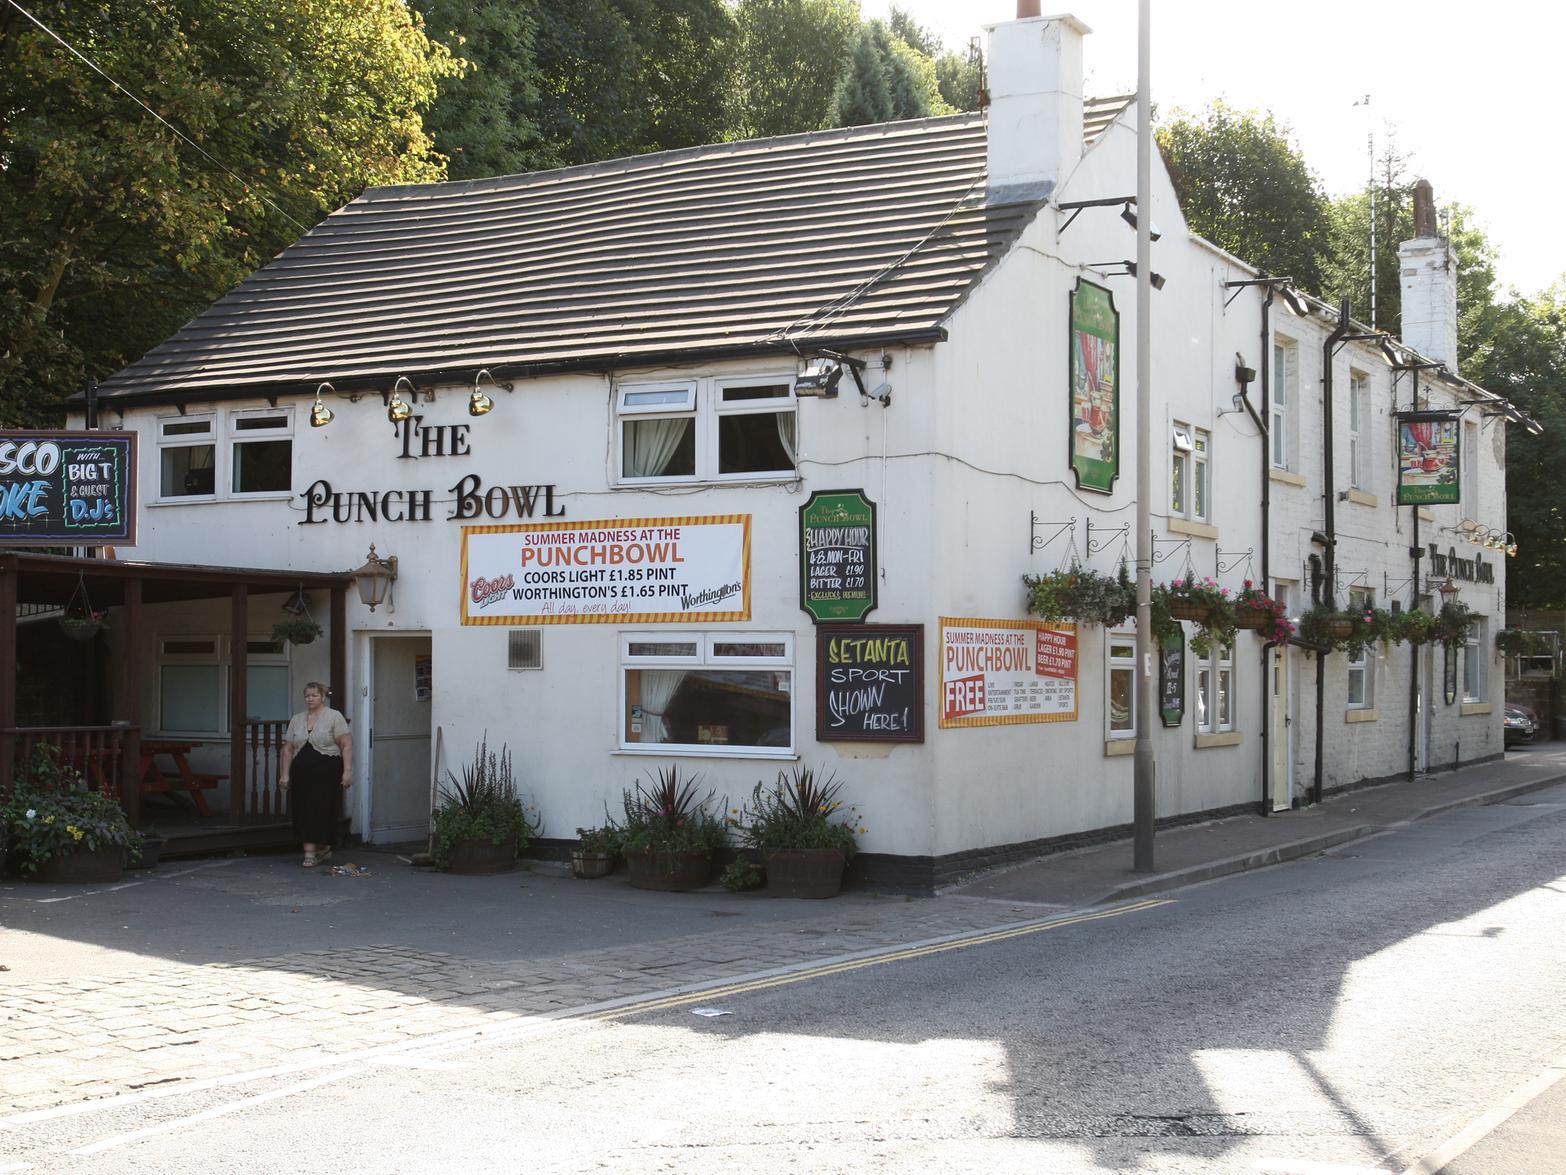 This pub has been situated at the bottom of Salterhebble hill since at least 1829. The pub is now derelict and as part of the A629 road plans the building could be demolished.